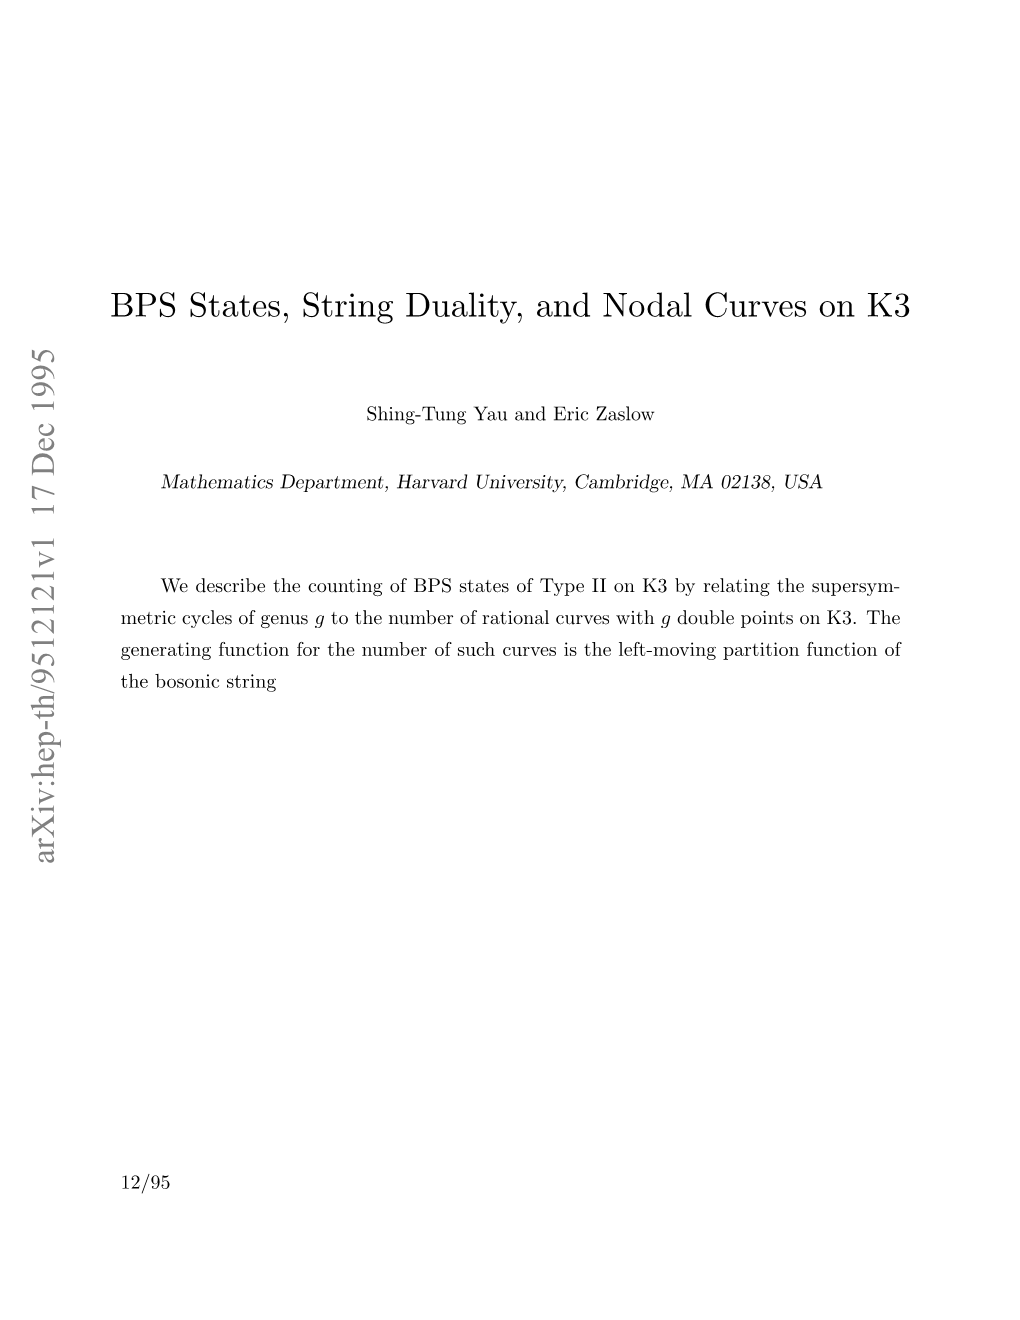 BPS States, String Duality, and Nodal Curves on K3